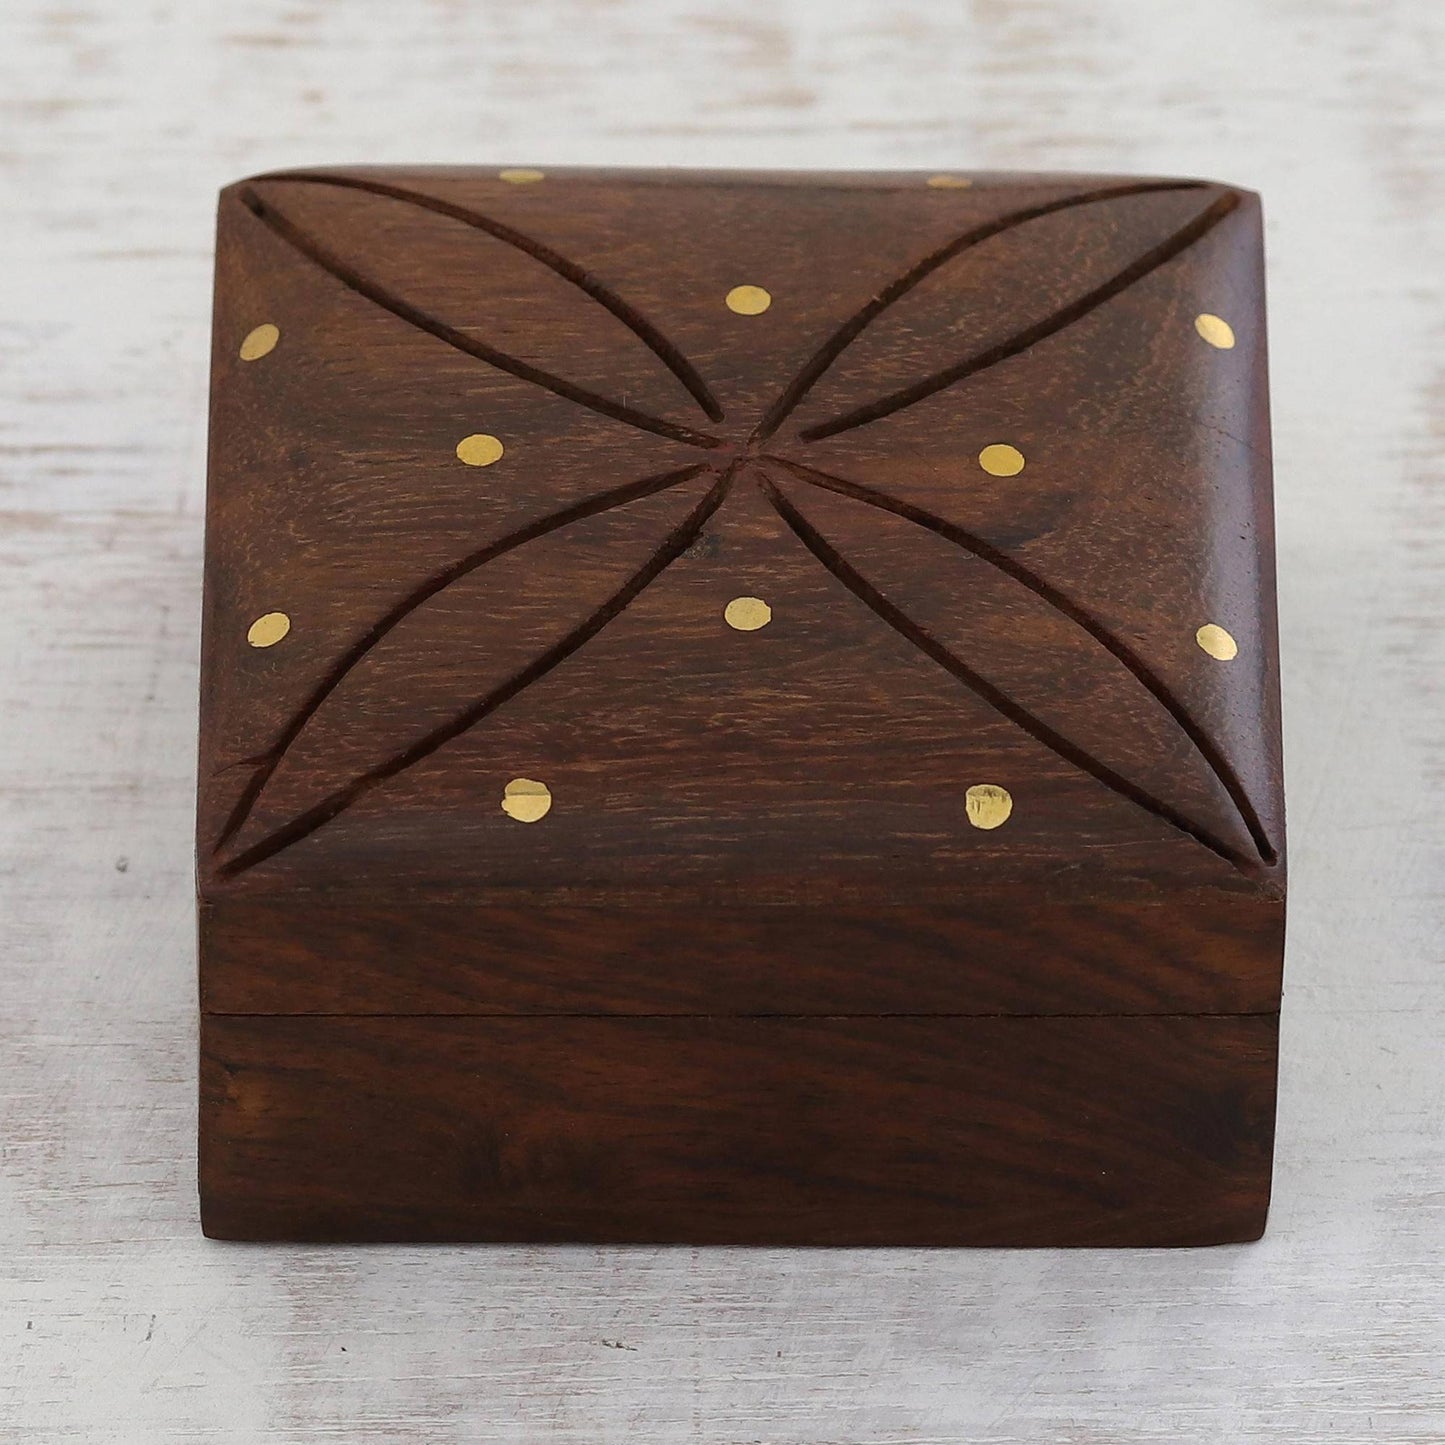 Refined Symmetry Mango Wood with Brass Dot Inlay Decorative Hinged-Lid Box